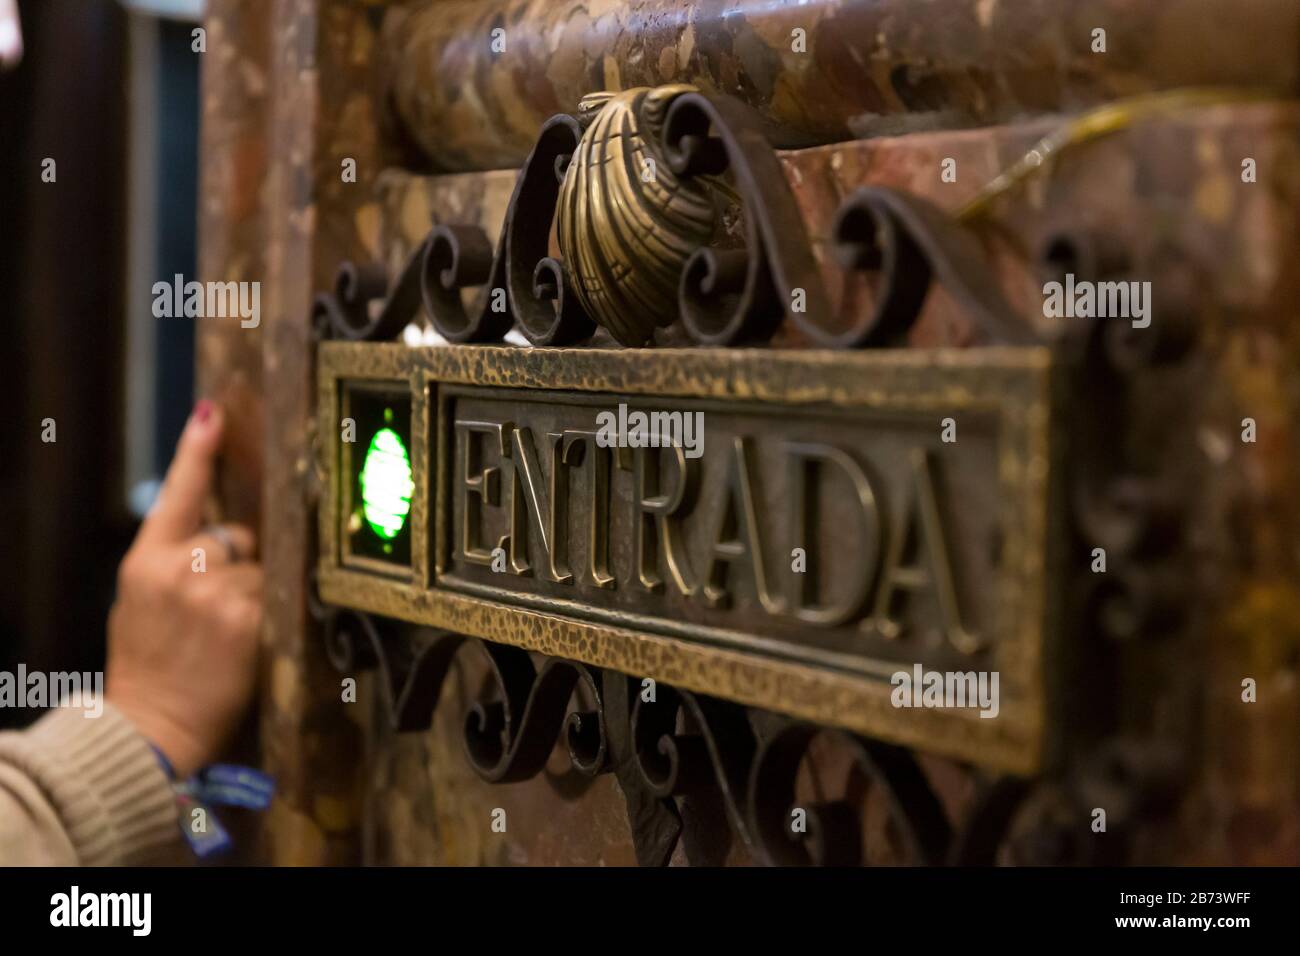 A green light signals the next person to enter the shrine containing the crypt of Saint James in the Cathedral of Santiago de Compostela in Galicia, S Stock Photo